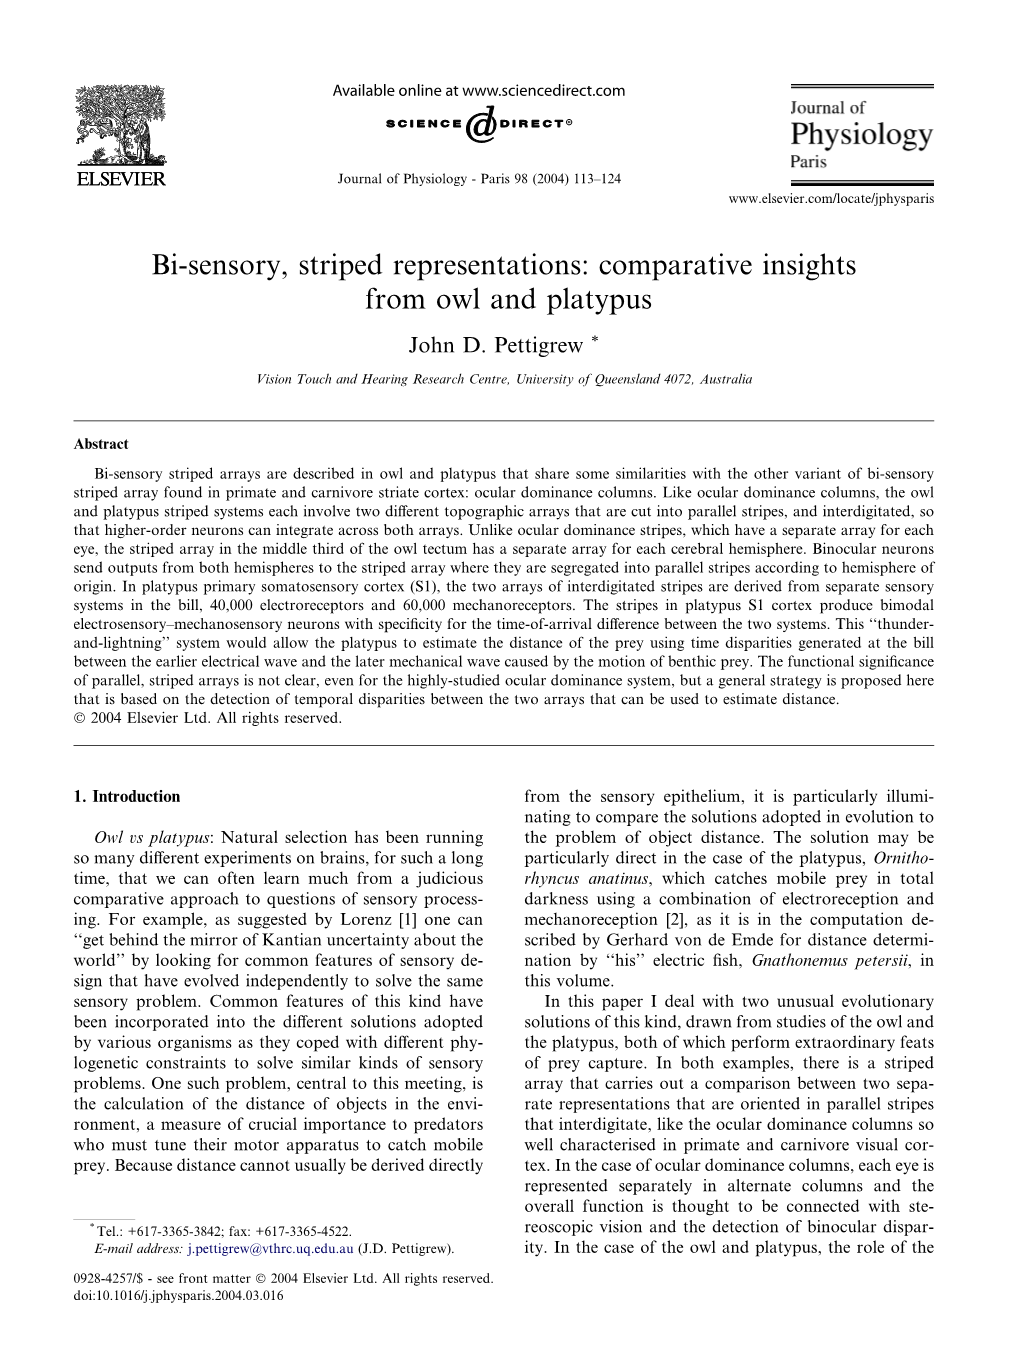 Bi-Sensory, Striped Representations: Comparative Insights from Owl and Platypus John D